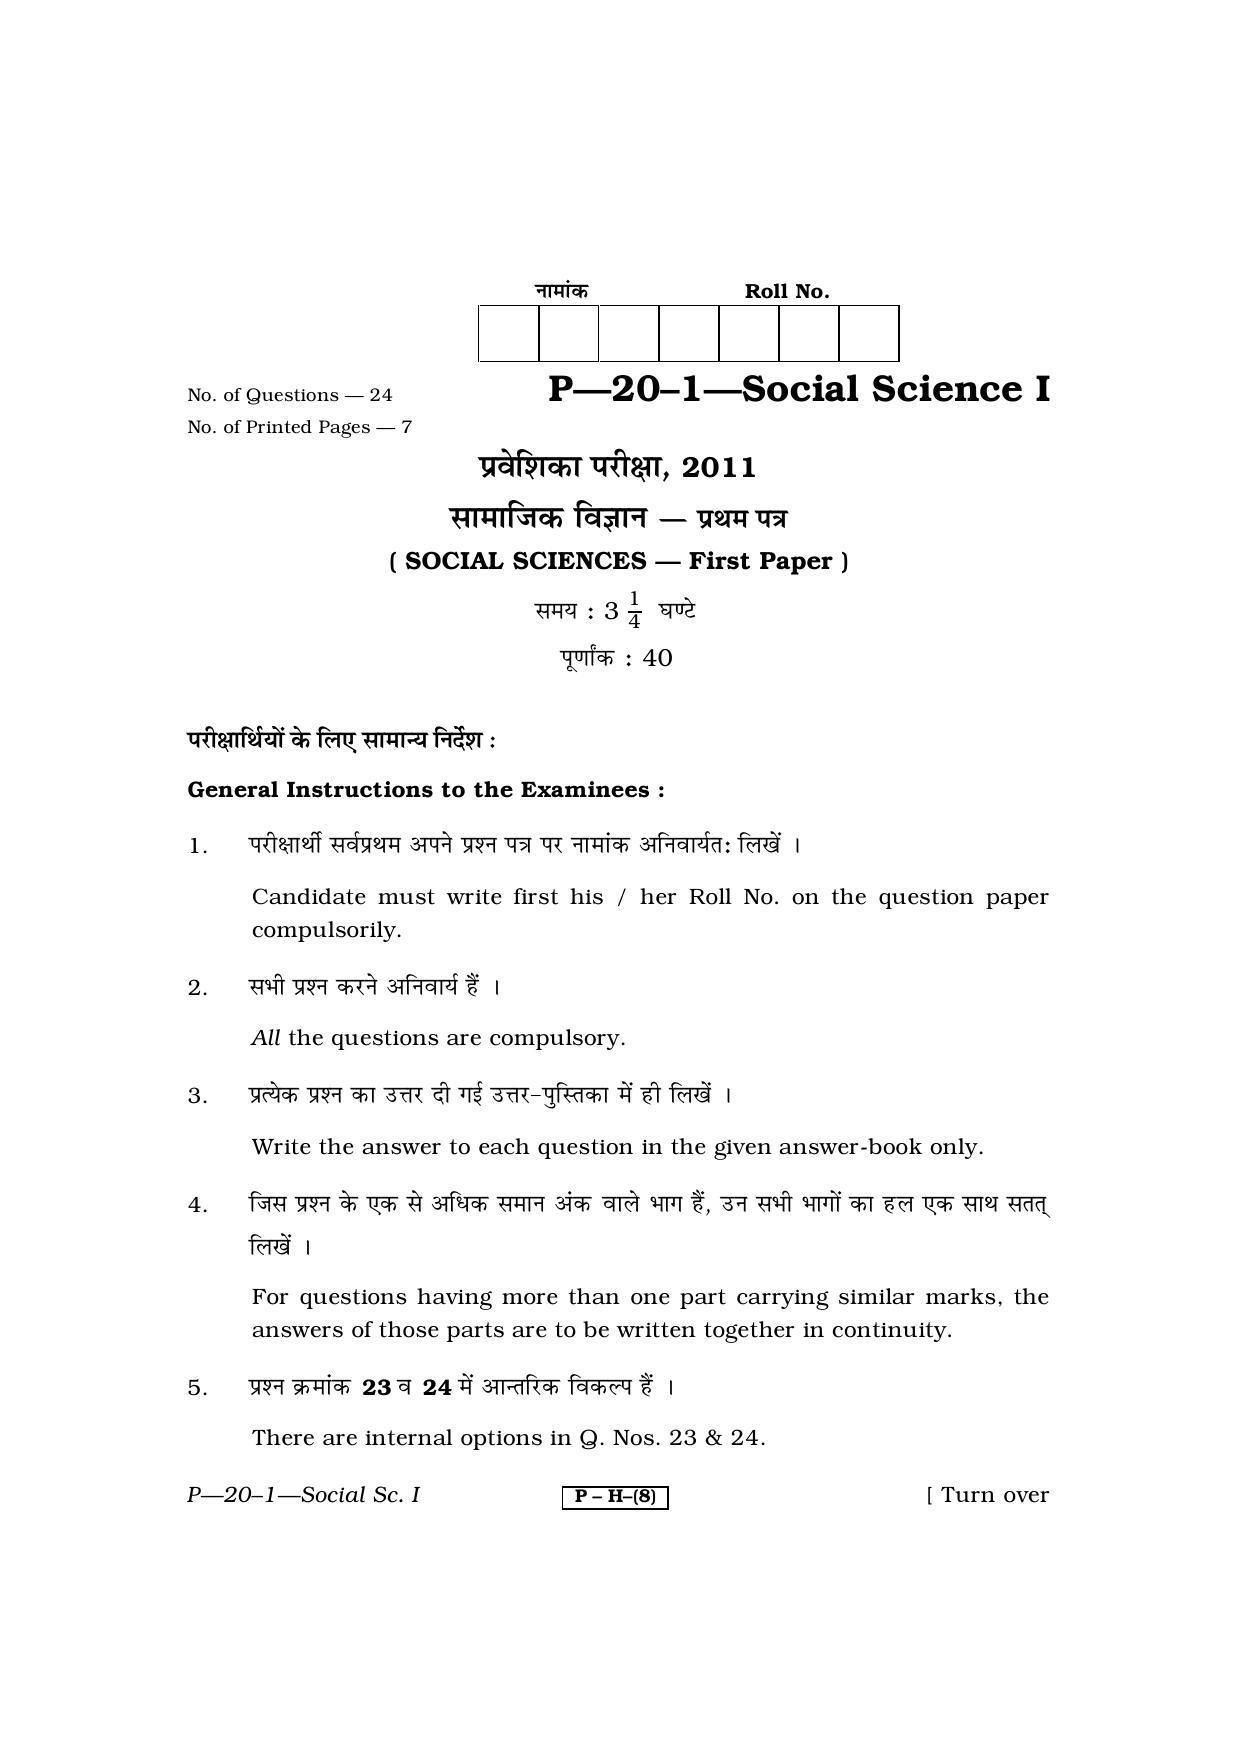 RBSE 2011 Social Science I Praveshika Question Paper - Page 1